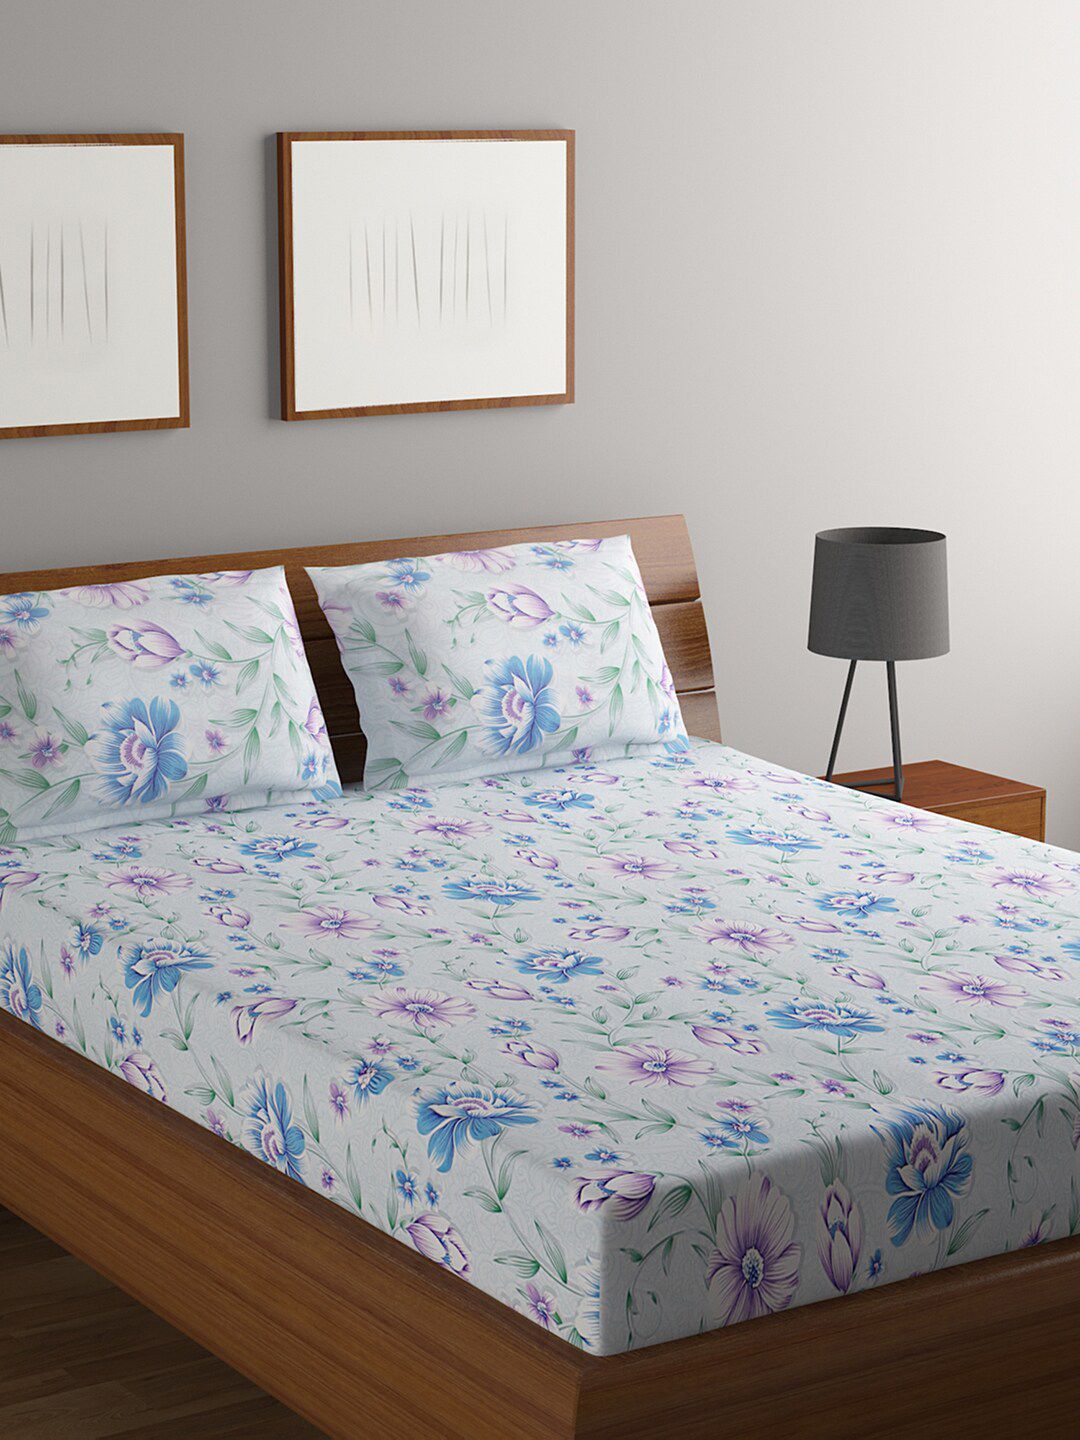 BOMBAY DYEING White & Blue Floral 140 TC King Cotton Bedsheet with 2 Pillow Covers Price in India